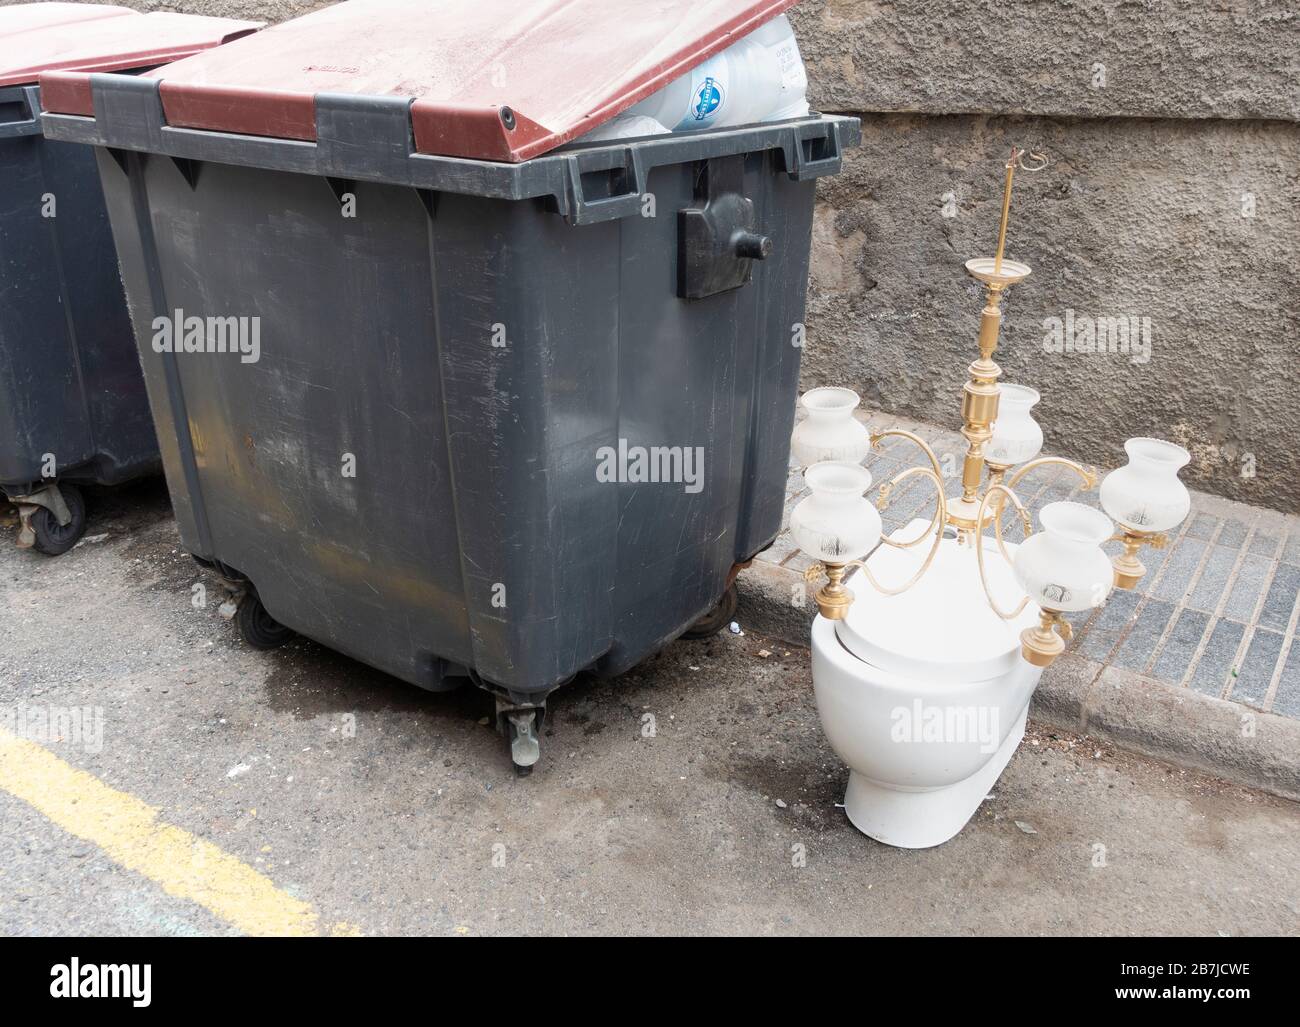 Toilet and chandelier left in street next to communal rubbish containers in street in Spain. Stock Photo